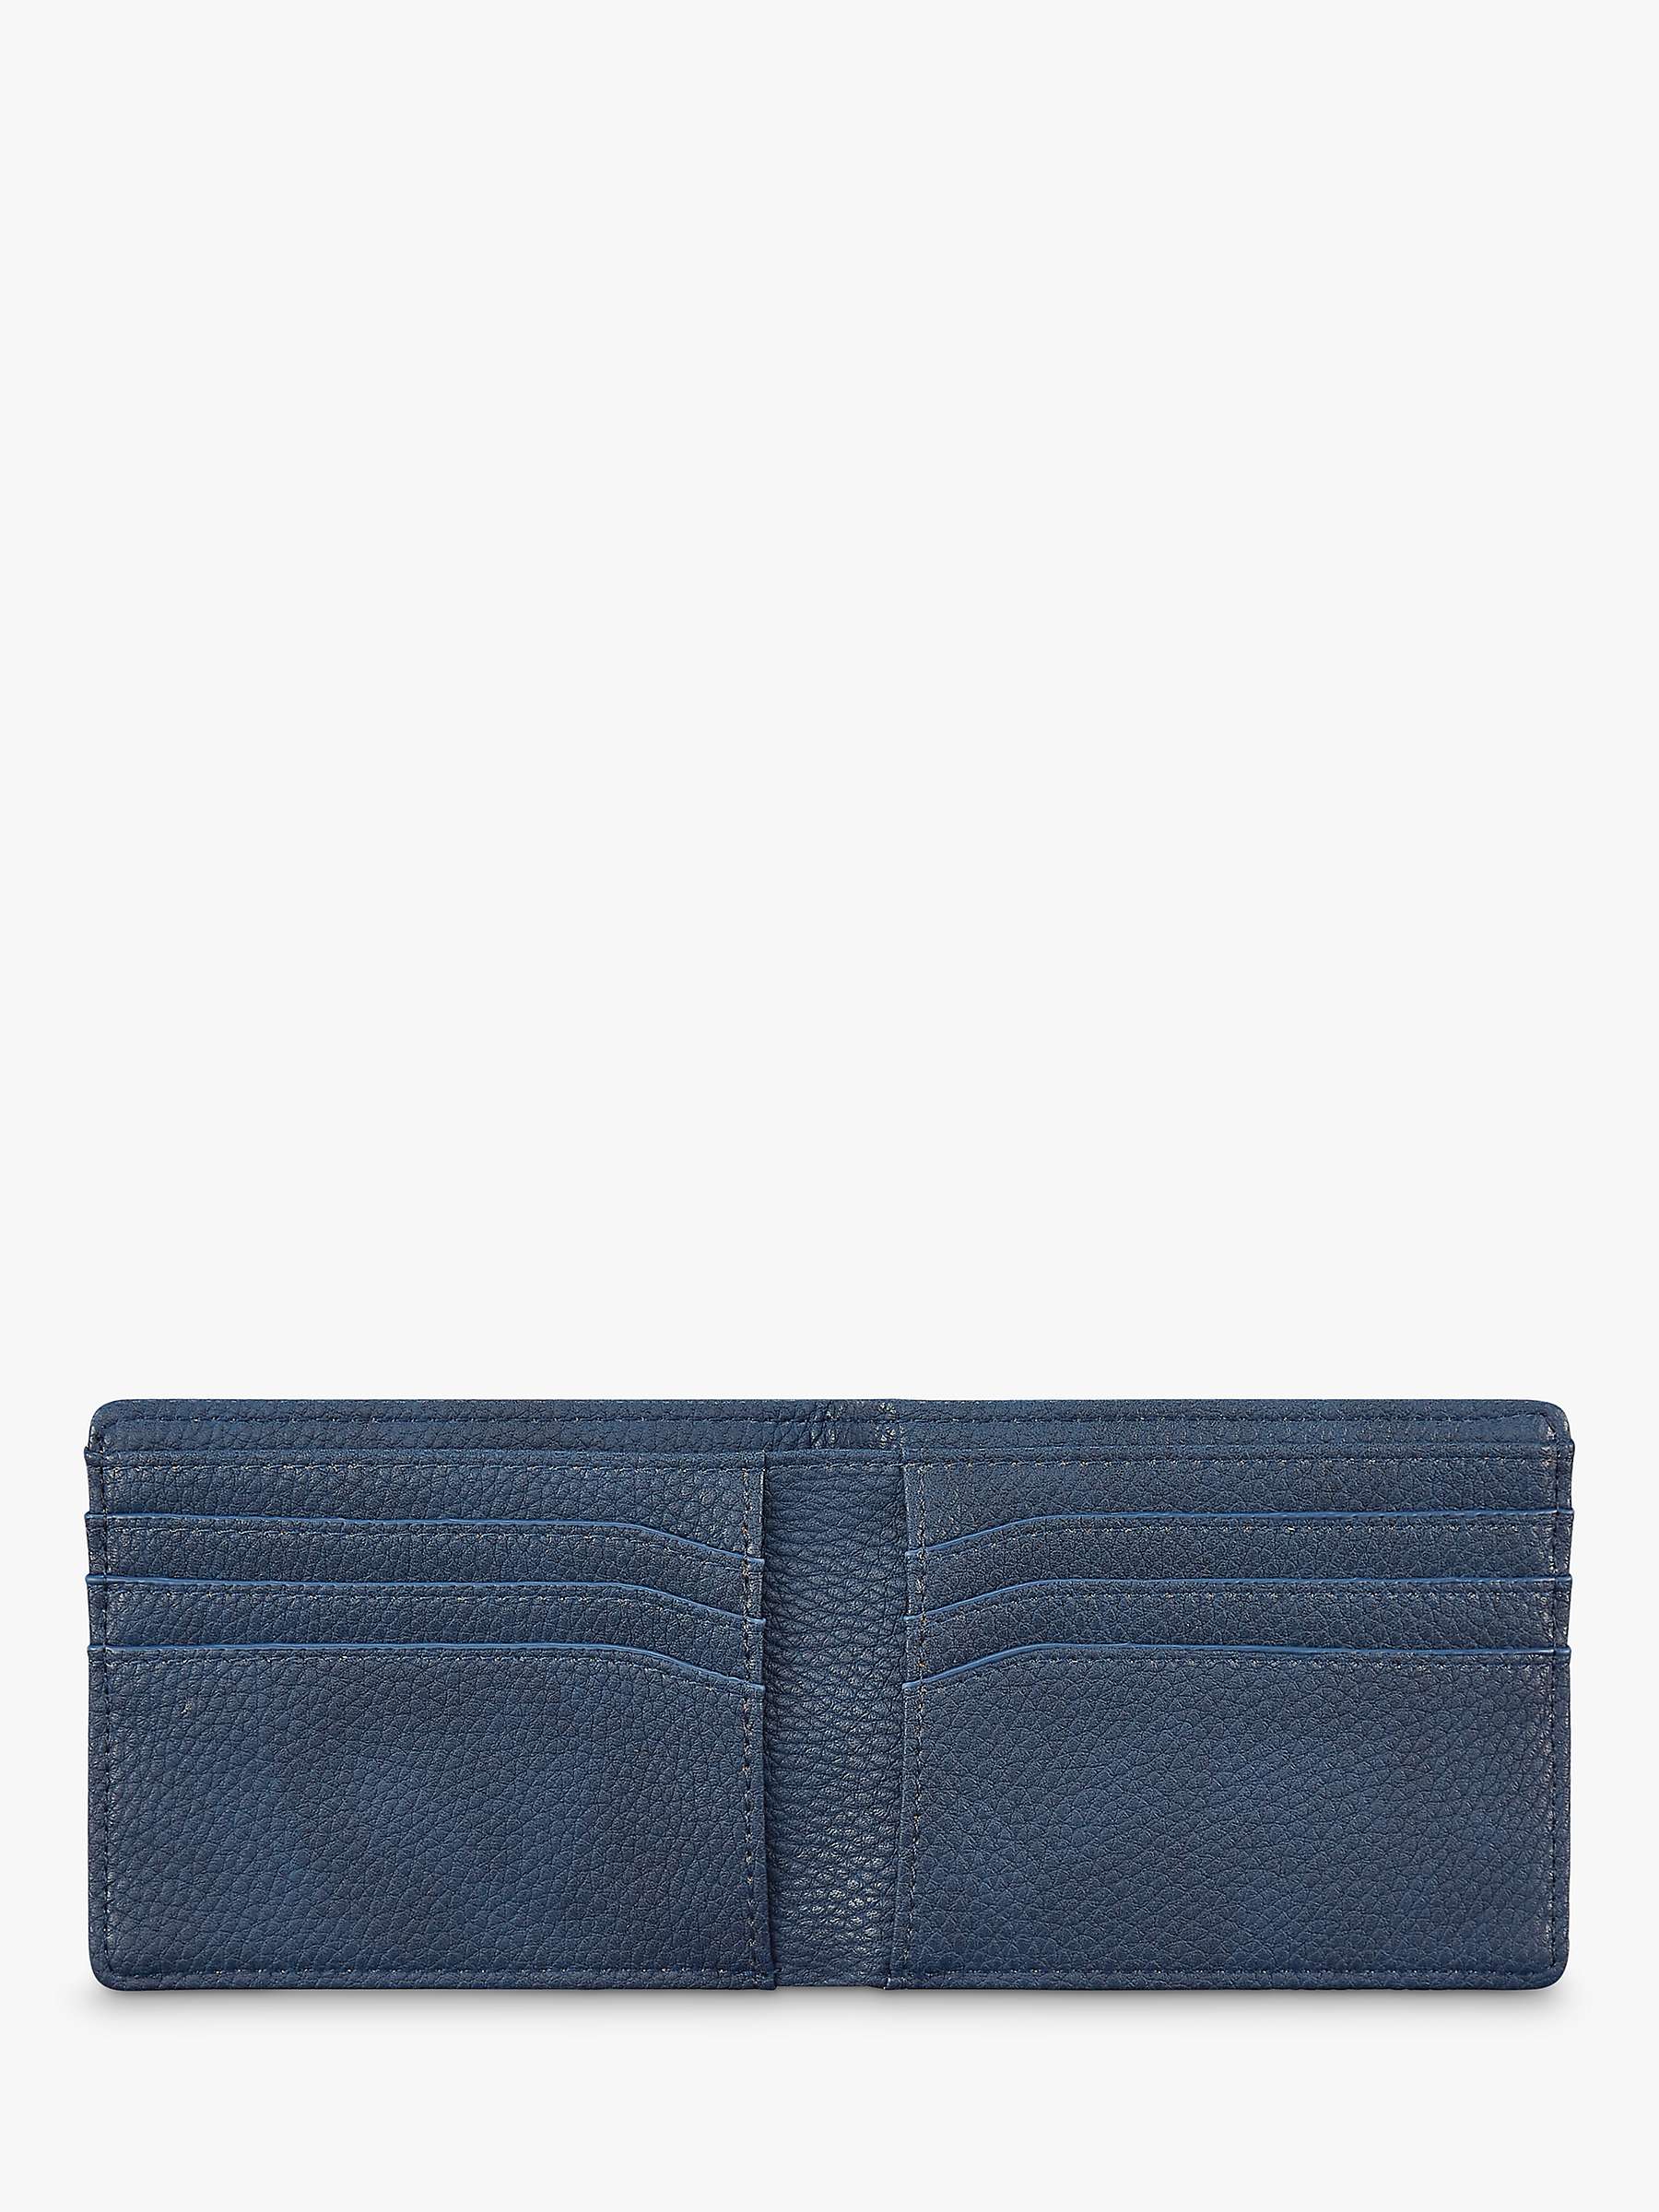 Buy Foxx Smith London Wallet Online at johnlewis.com